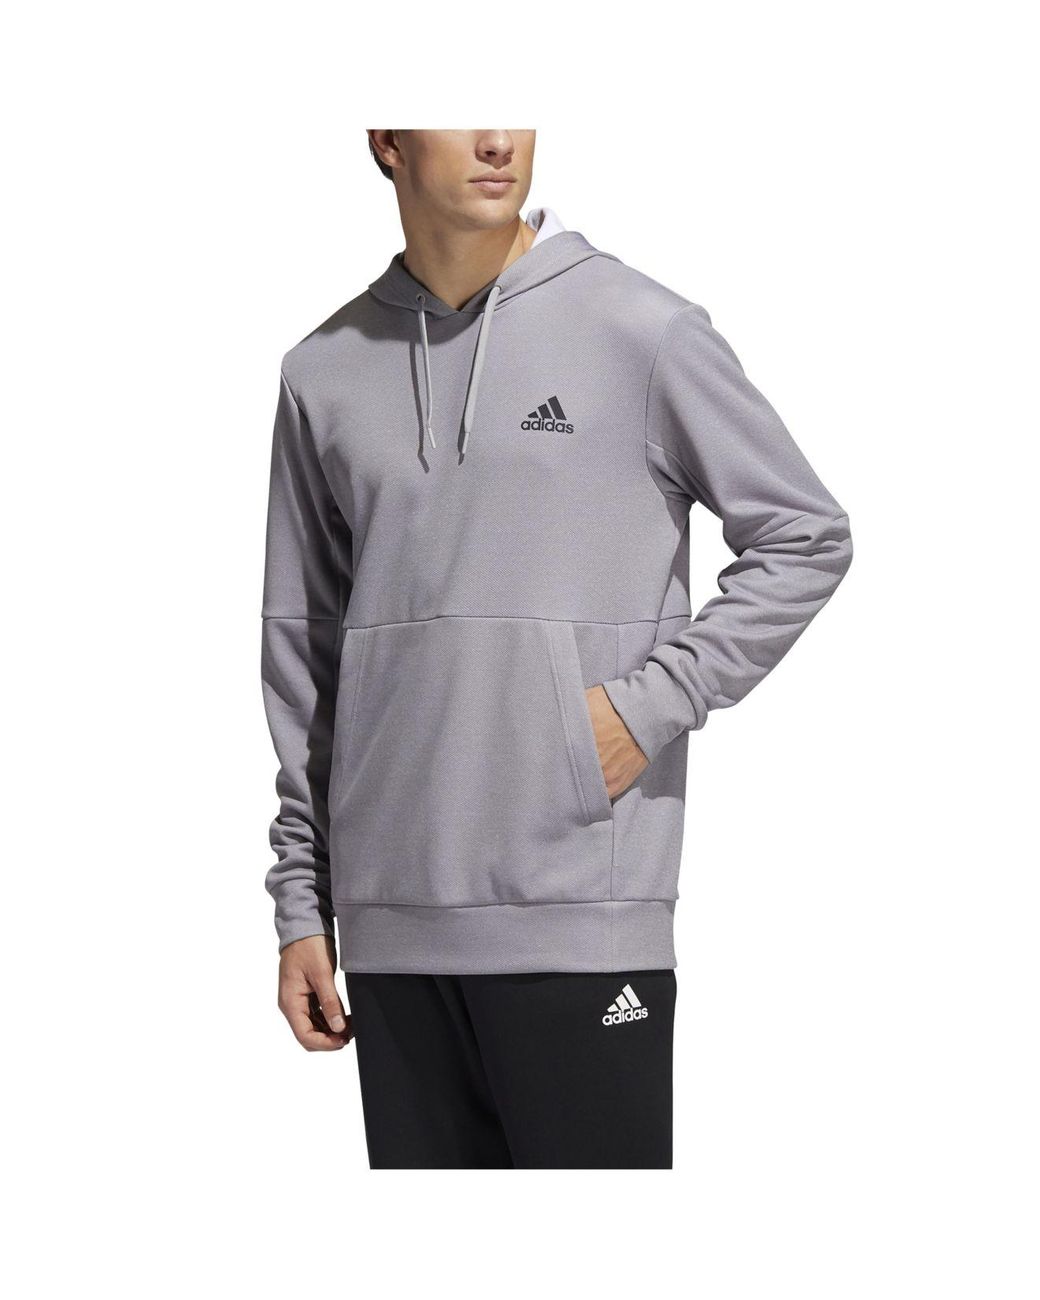 adidas Fleece Game And Go Pullover Hoodie in Gray for Men - Lyst